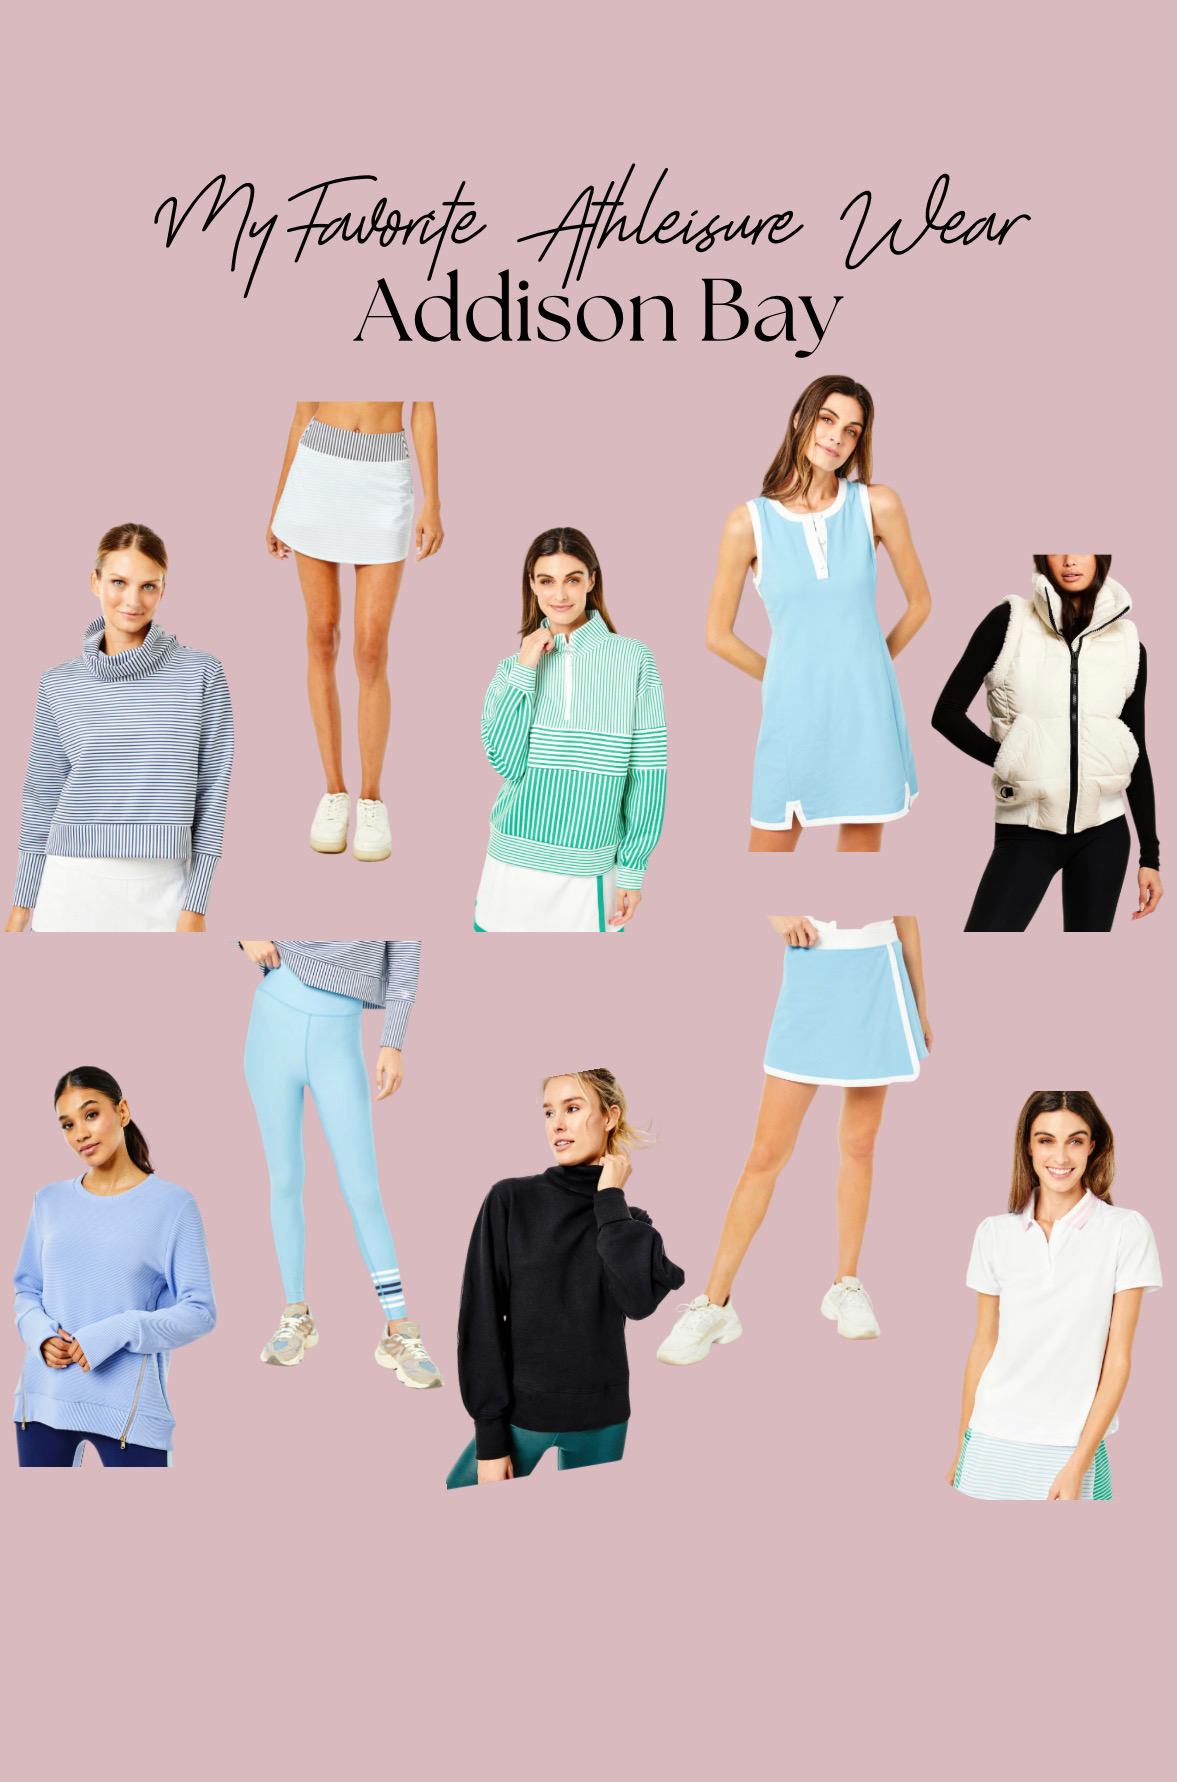 addison bay outfits